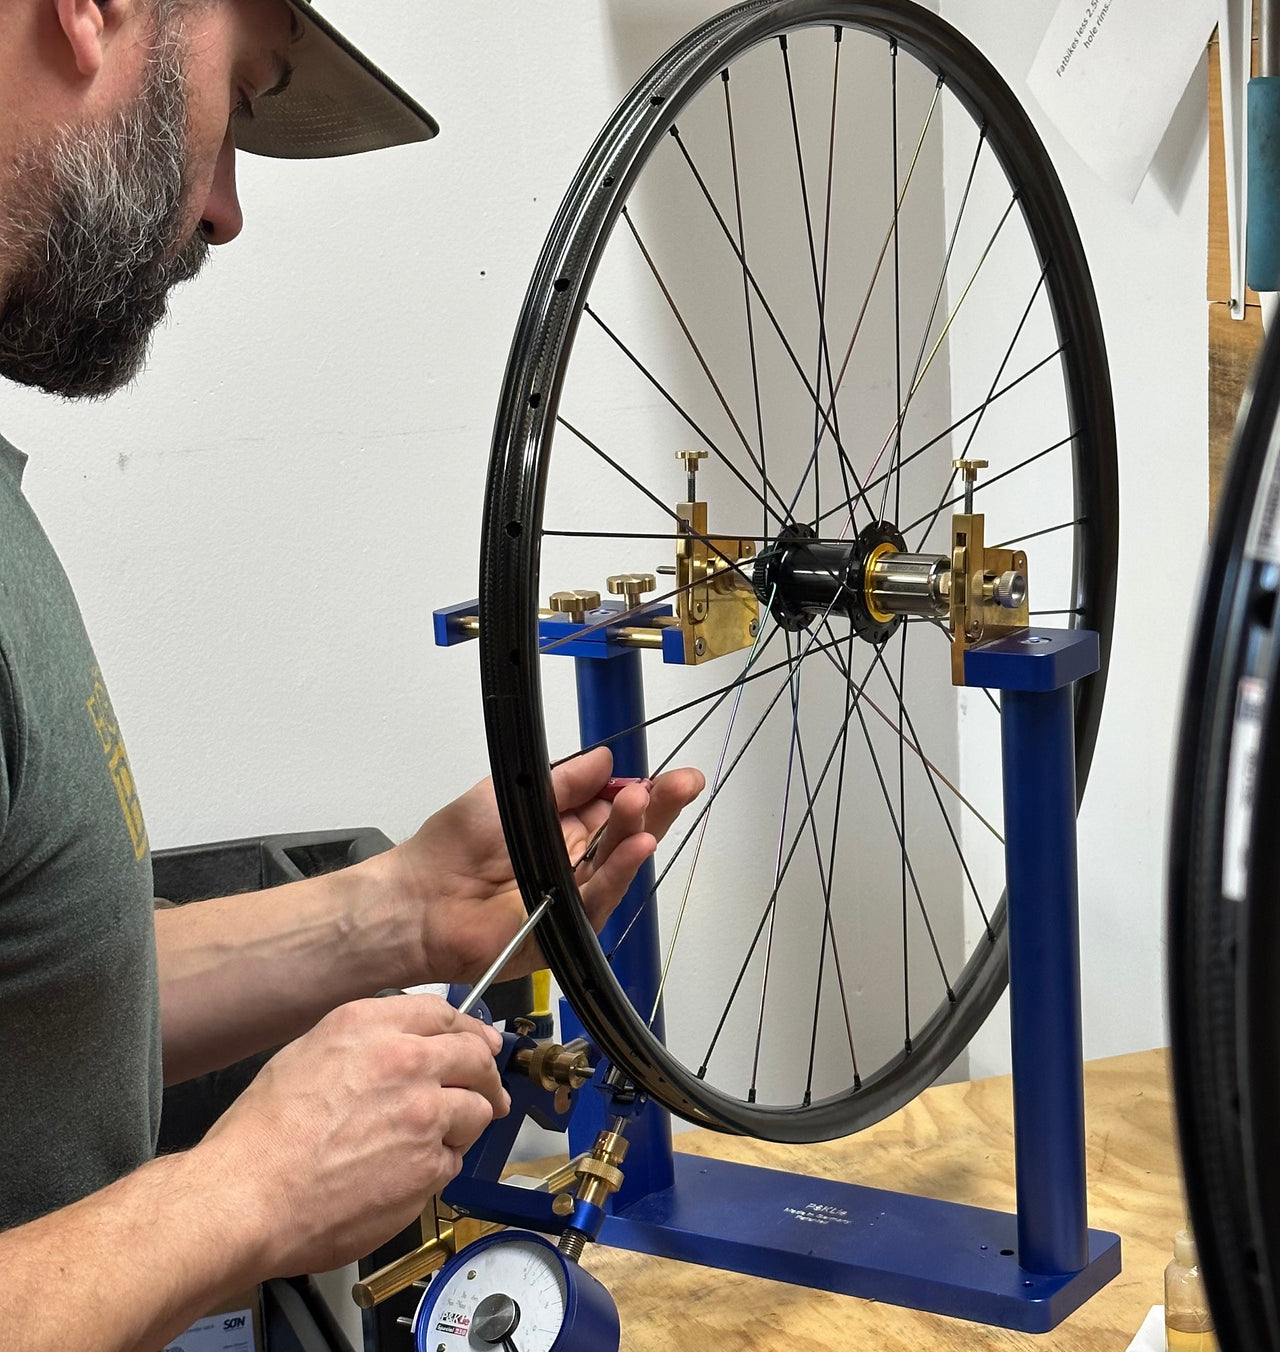 Advanced Wheel Building Course (In Beta Test)